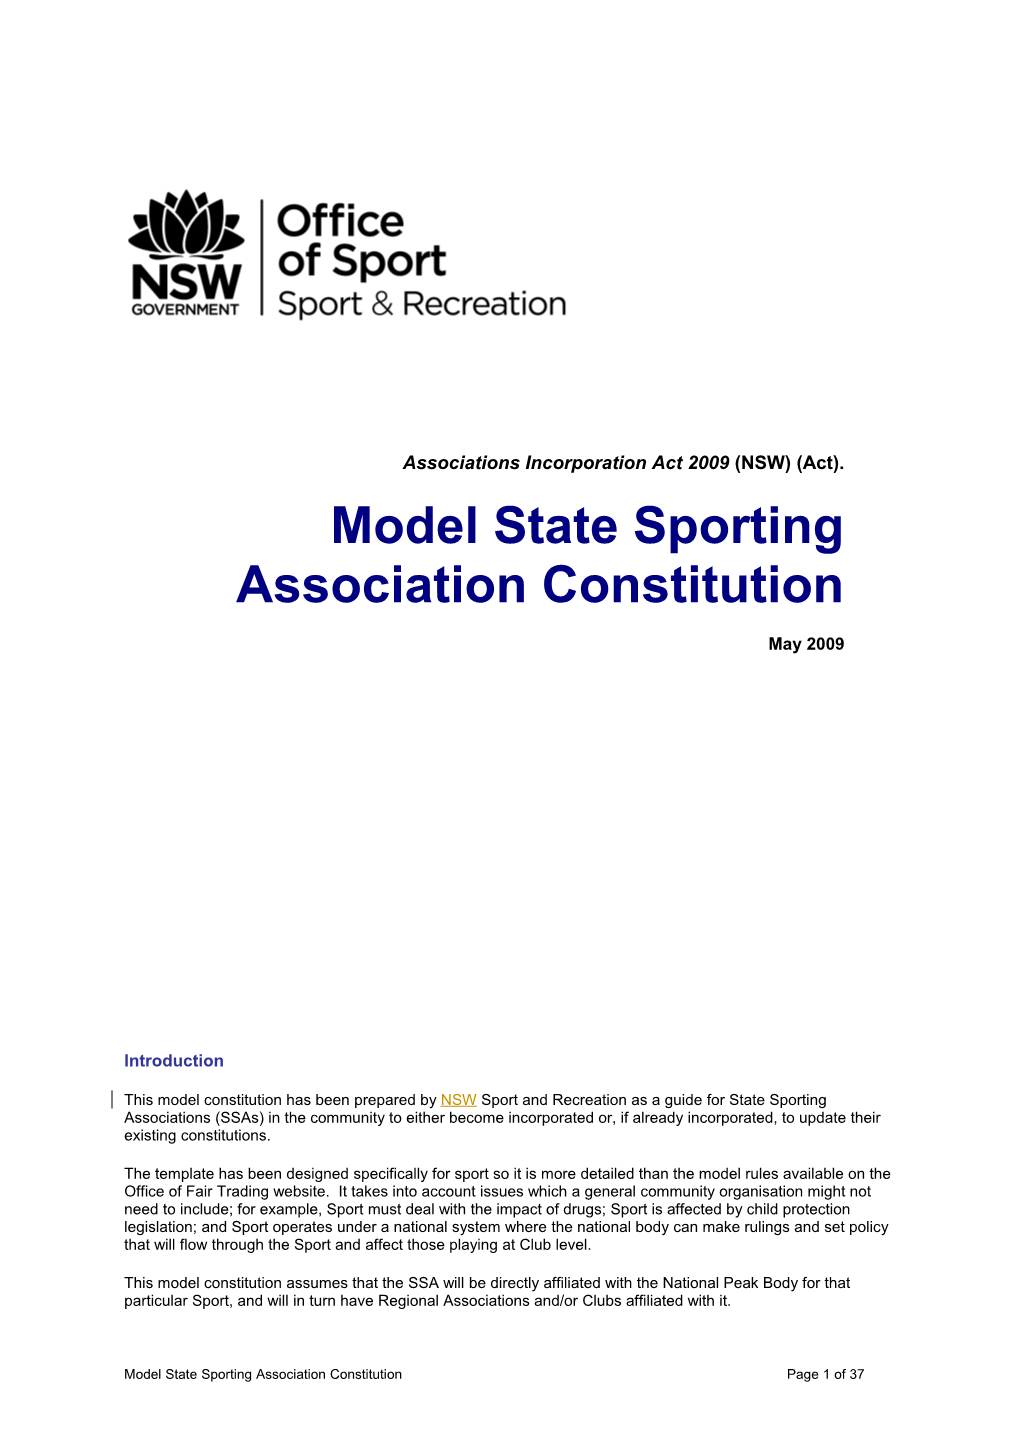 This Model Constitution Has Been Prepared by NSW Sport and Recreation As a Guide for State